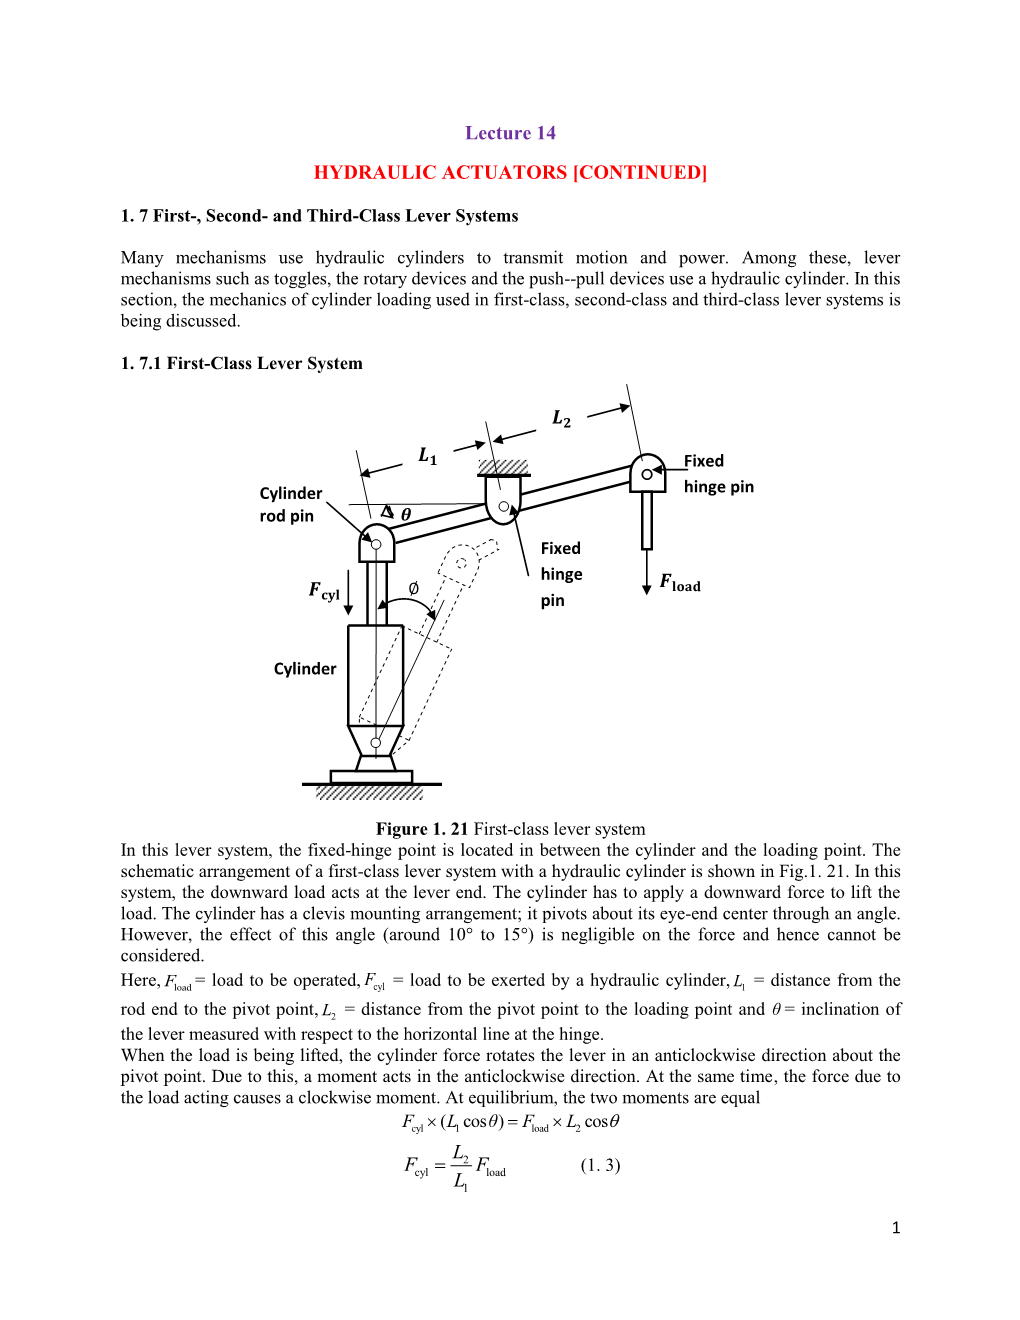 Lecture 14 HYDRAULIC ACTUATORS [CONTINUED]